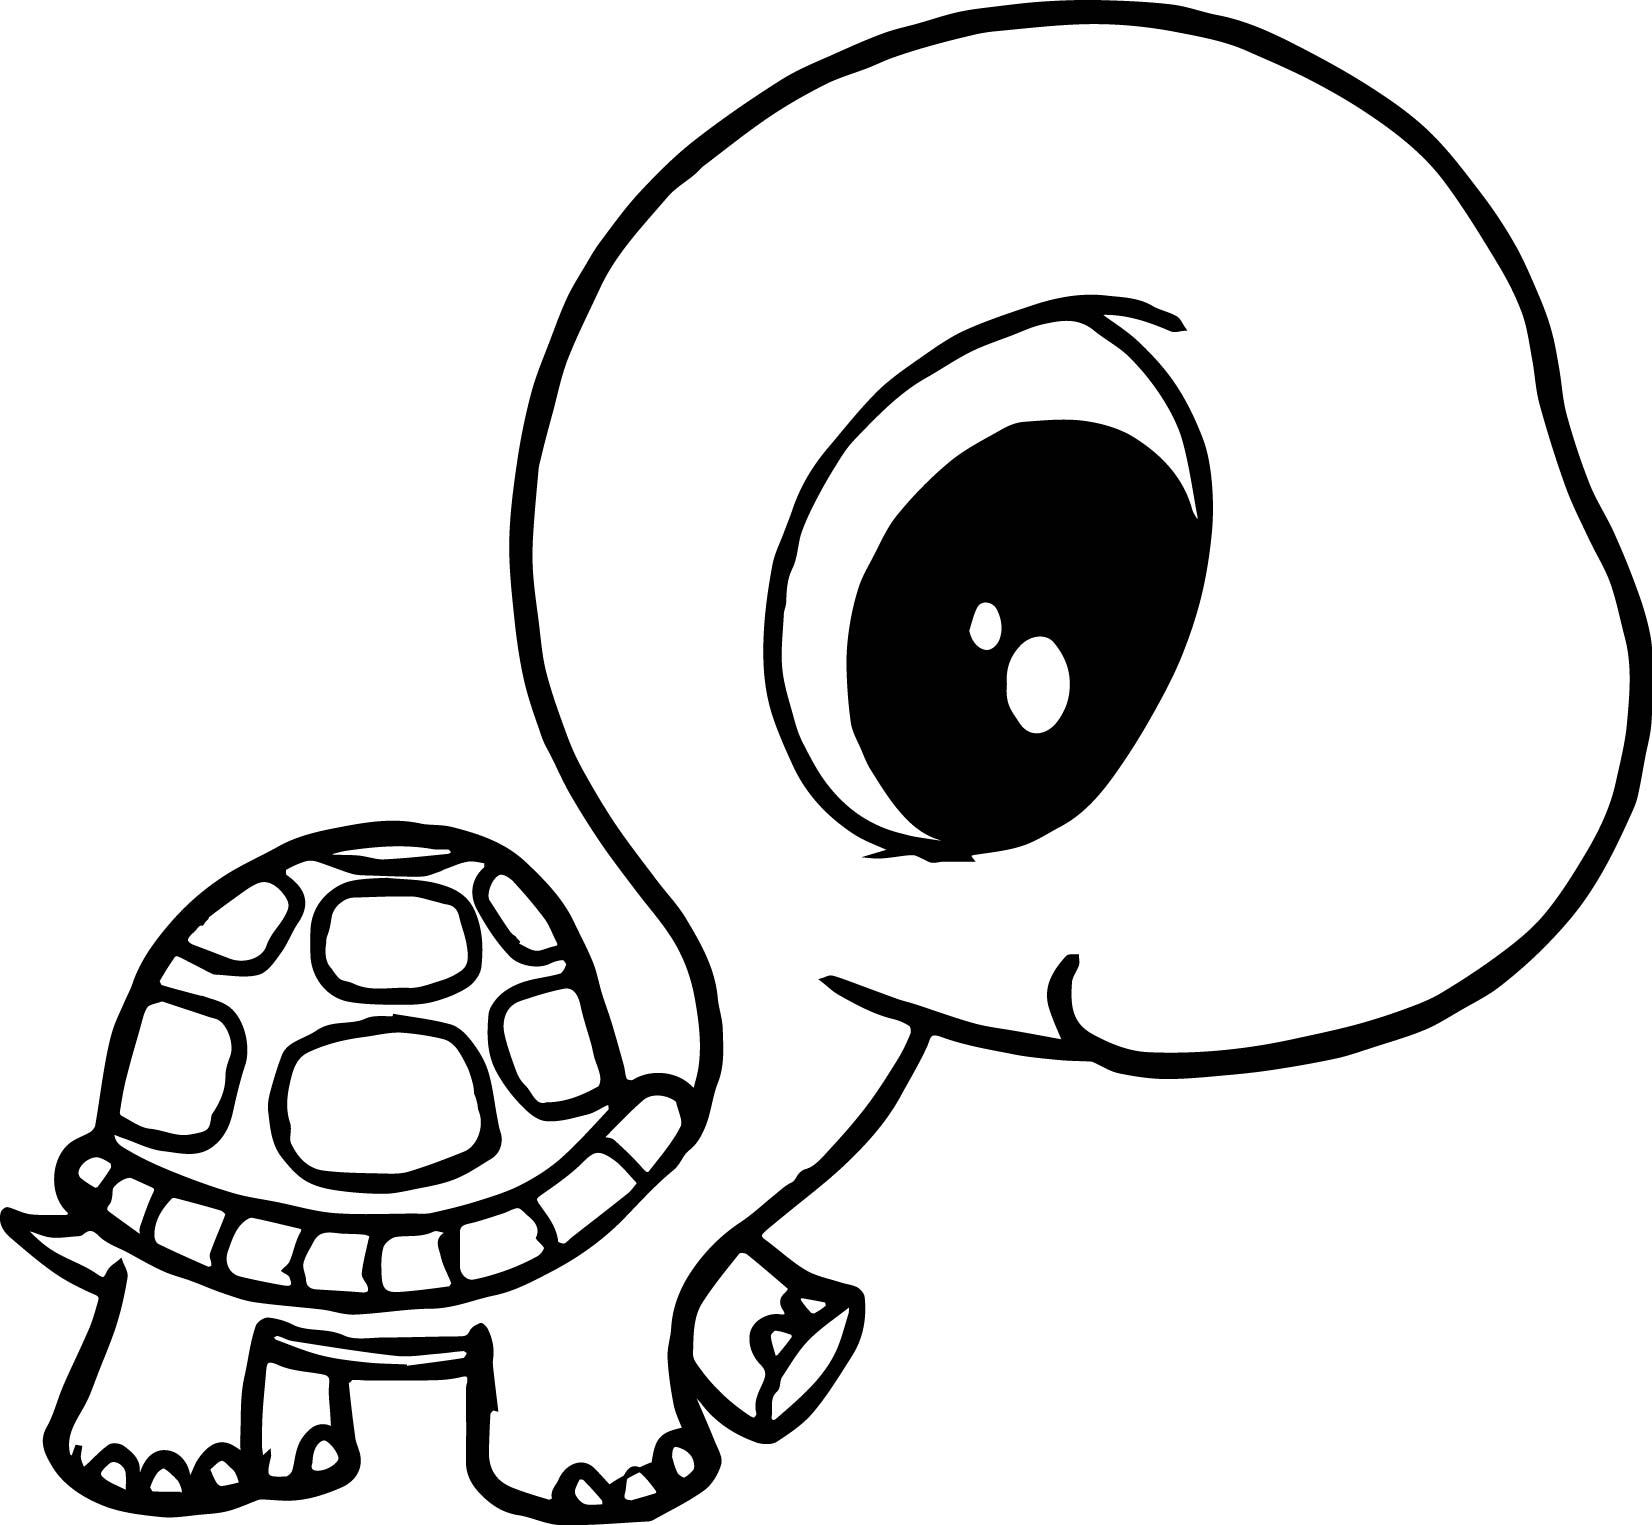 Baby Turtle Coloring Pages at GetColorings.com | Free printable